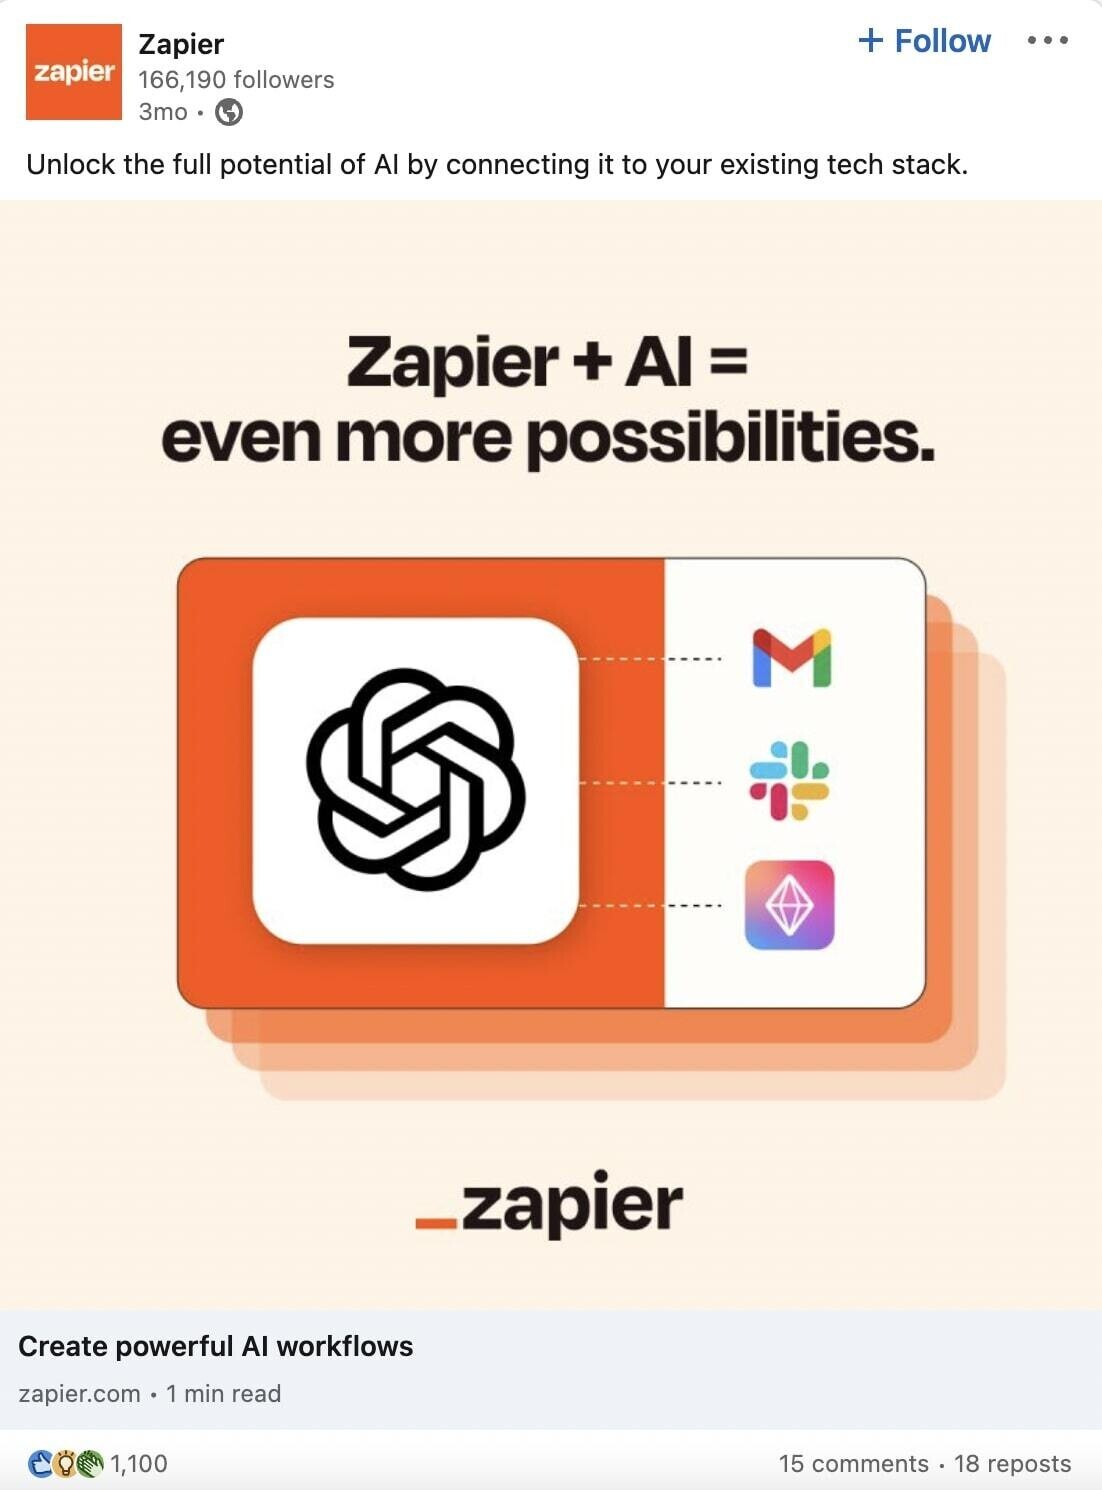 an example of an ad from Zapier on unlocking the full potential of AI